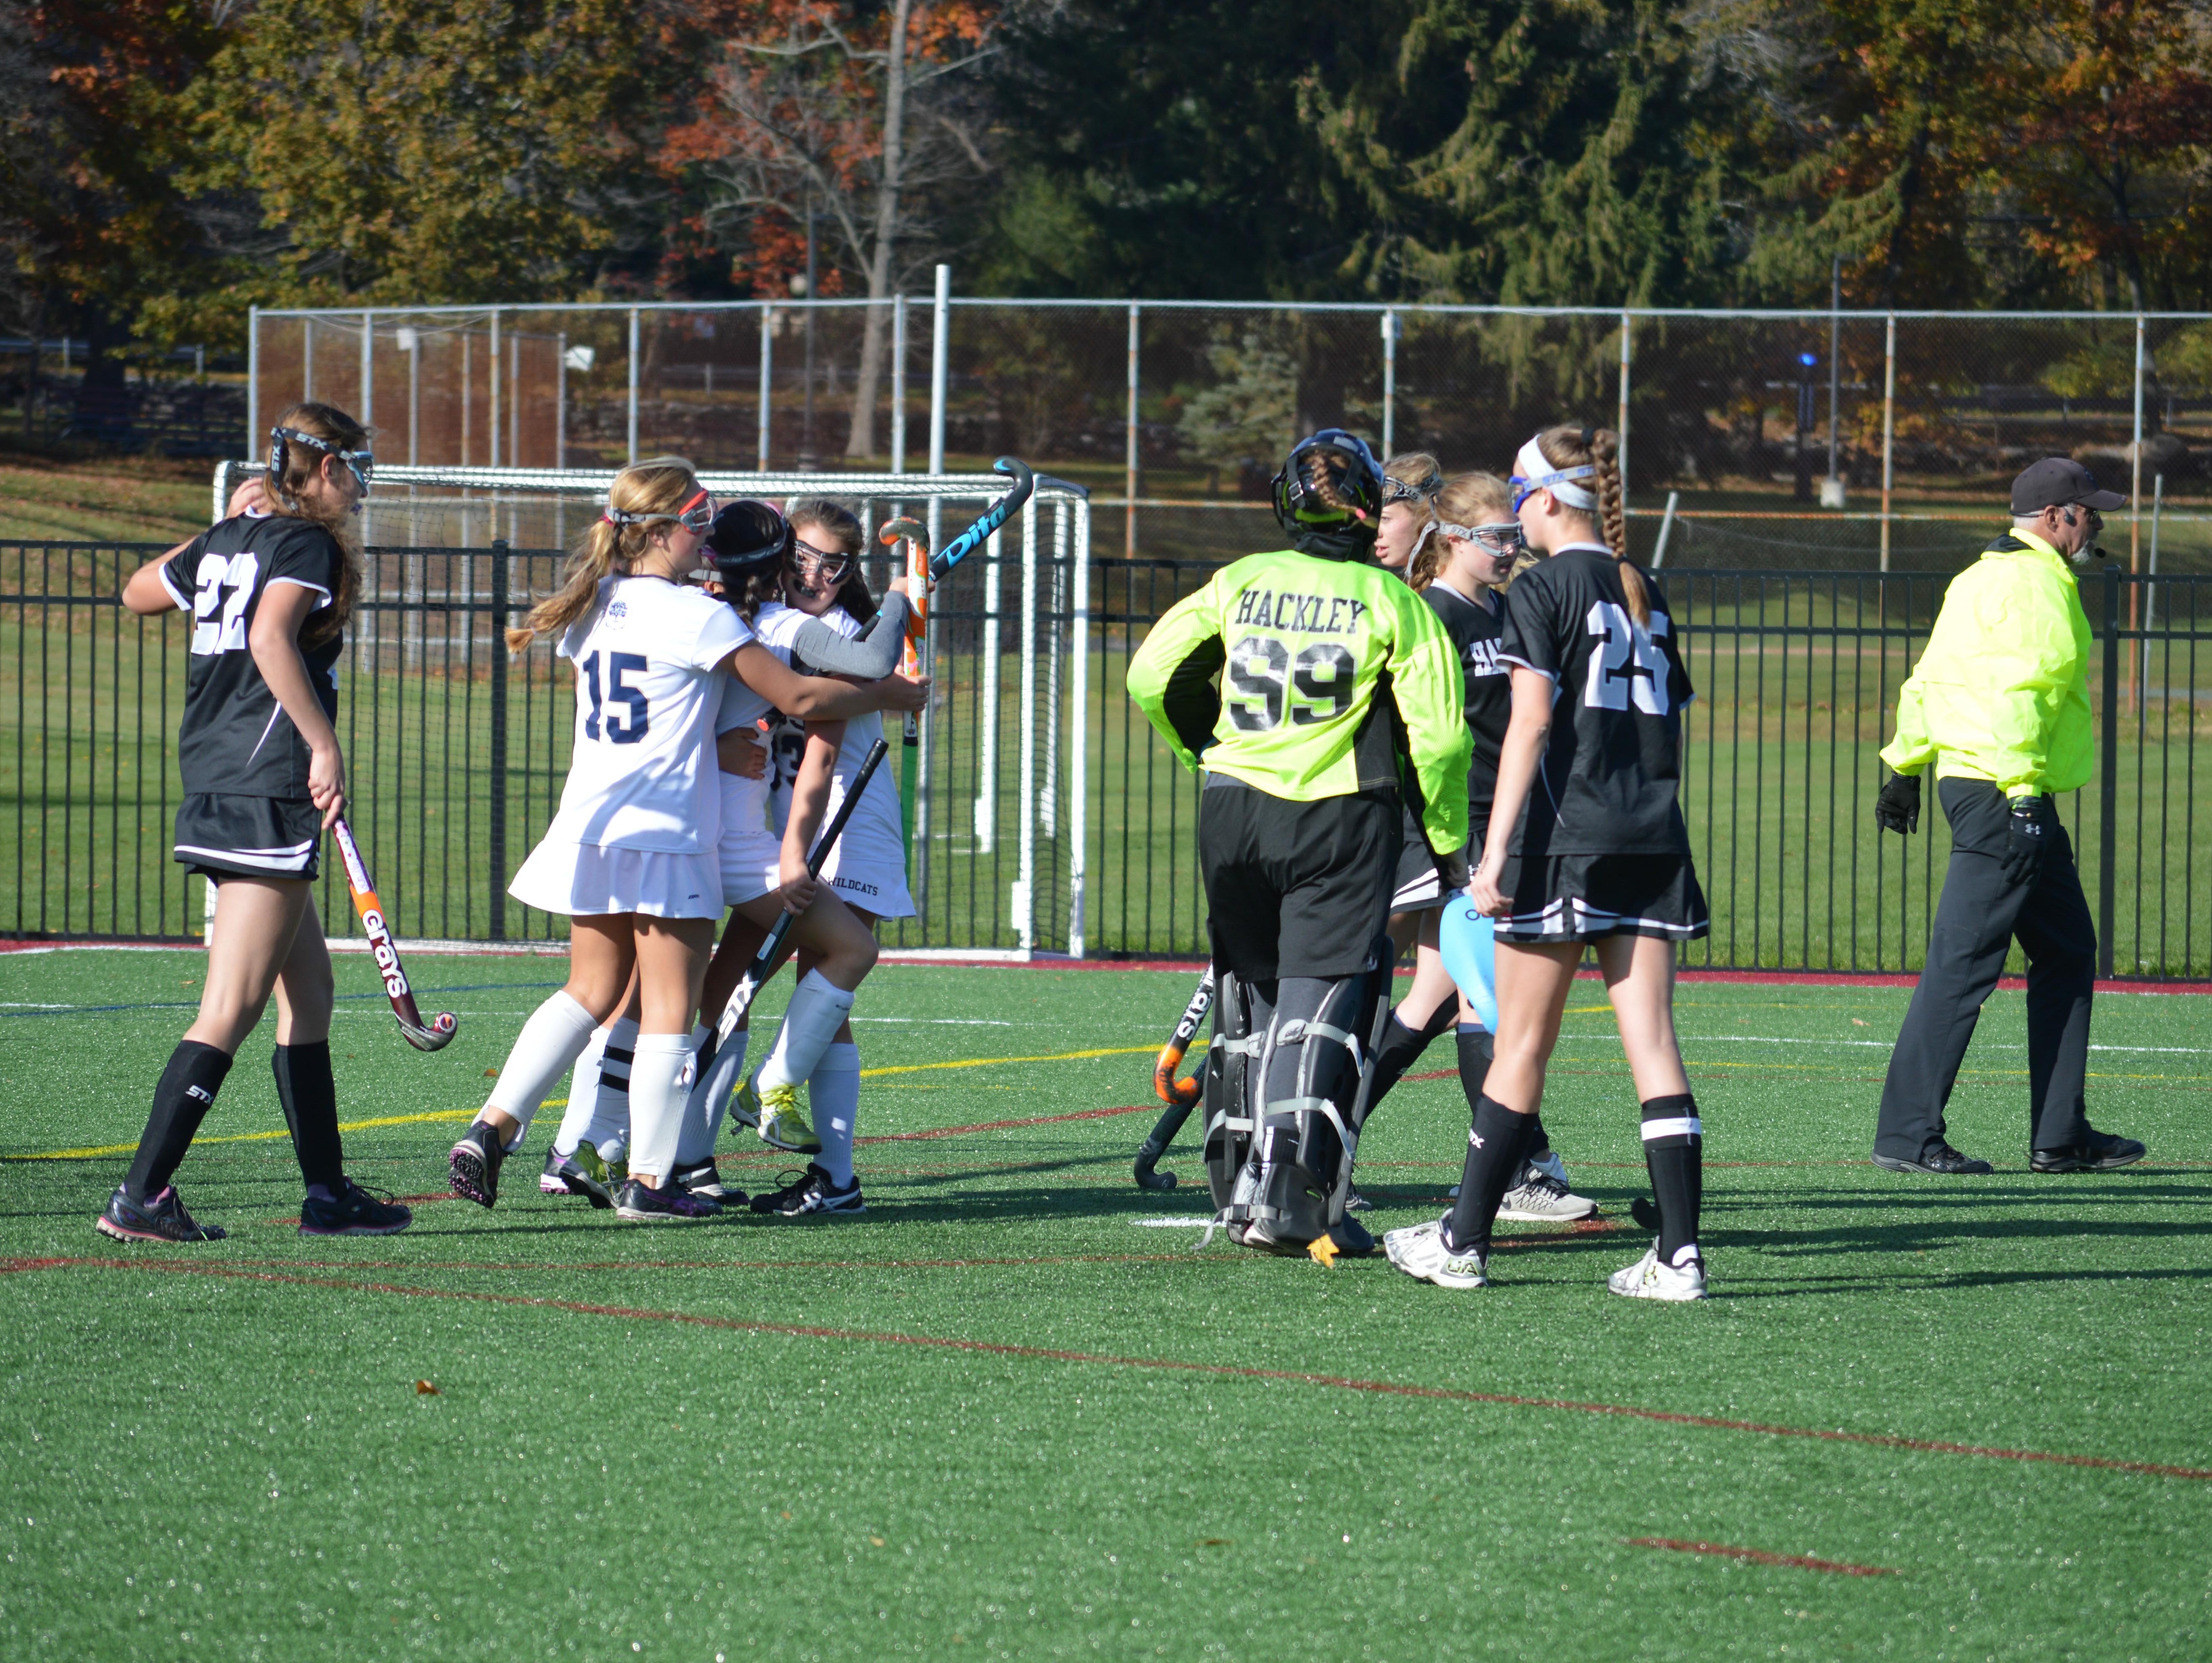 Rye Country Day School (in white) celebrates after scoring the game-winning goal in overtime in the 2016 NYSAIS field hockey final at Manhattanville College on Nov. 6, 2016.